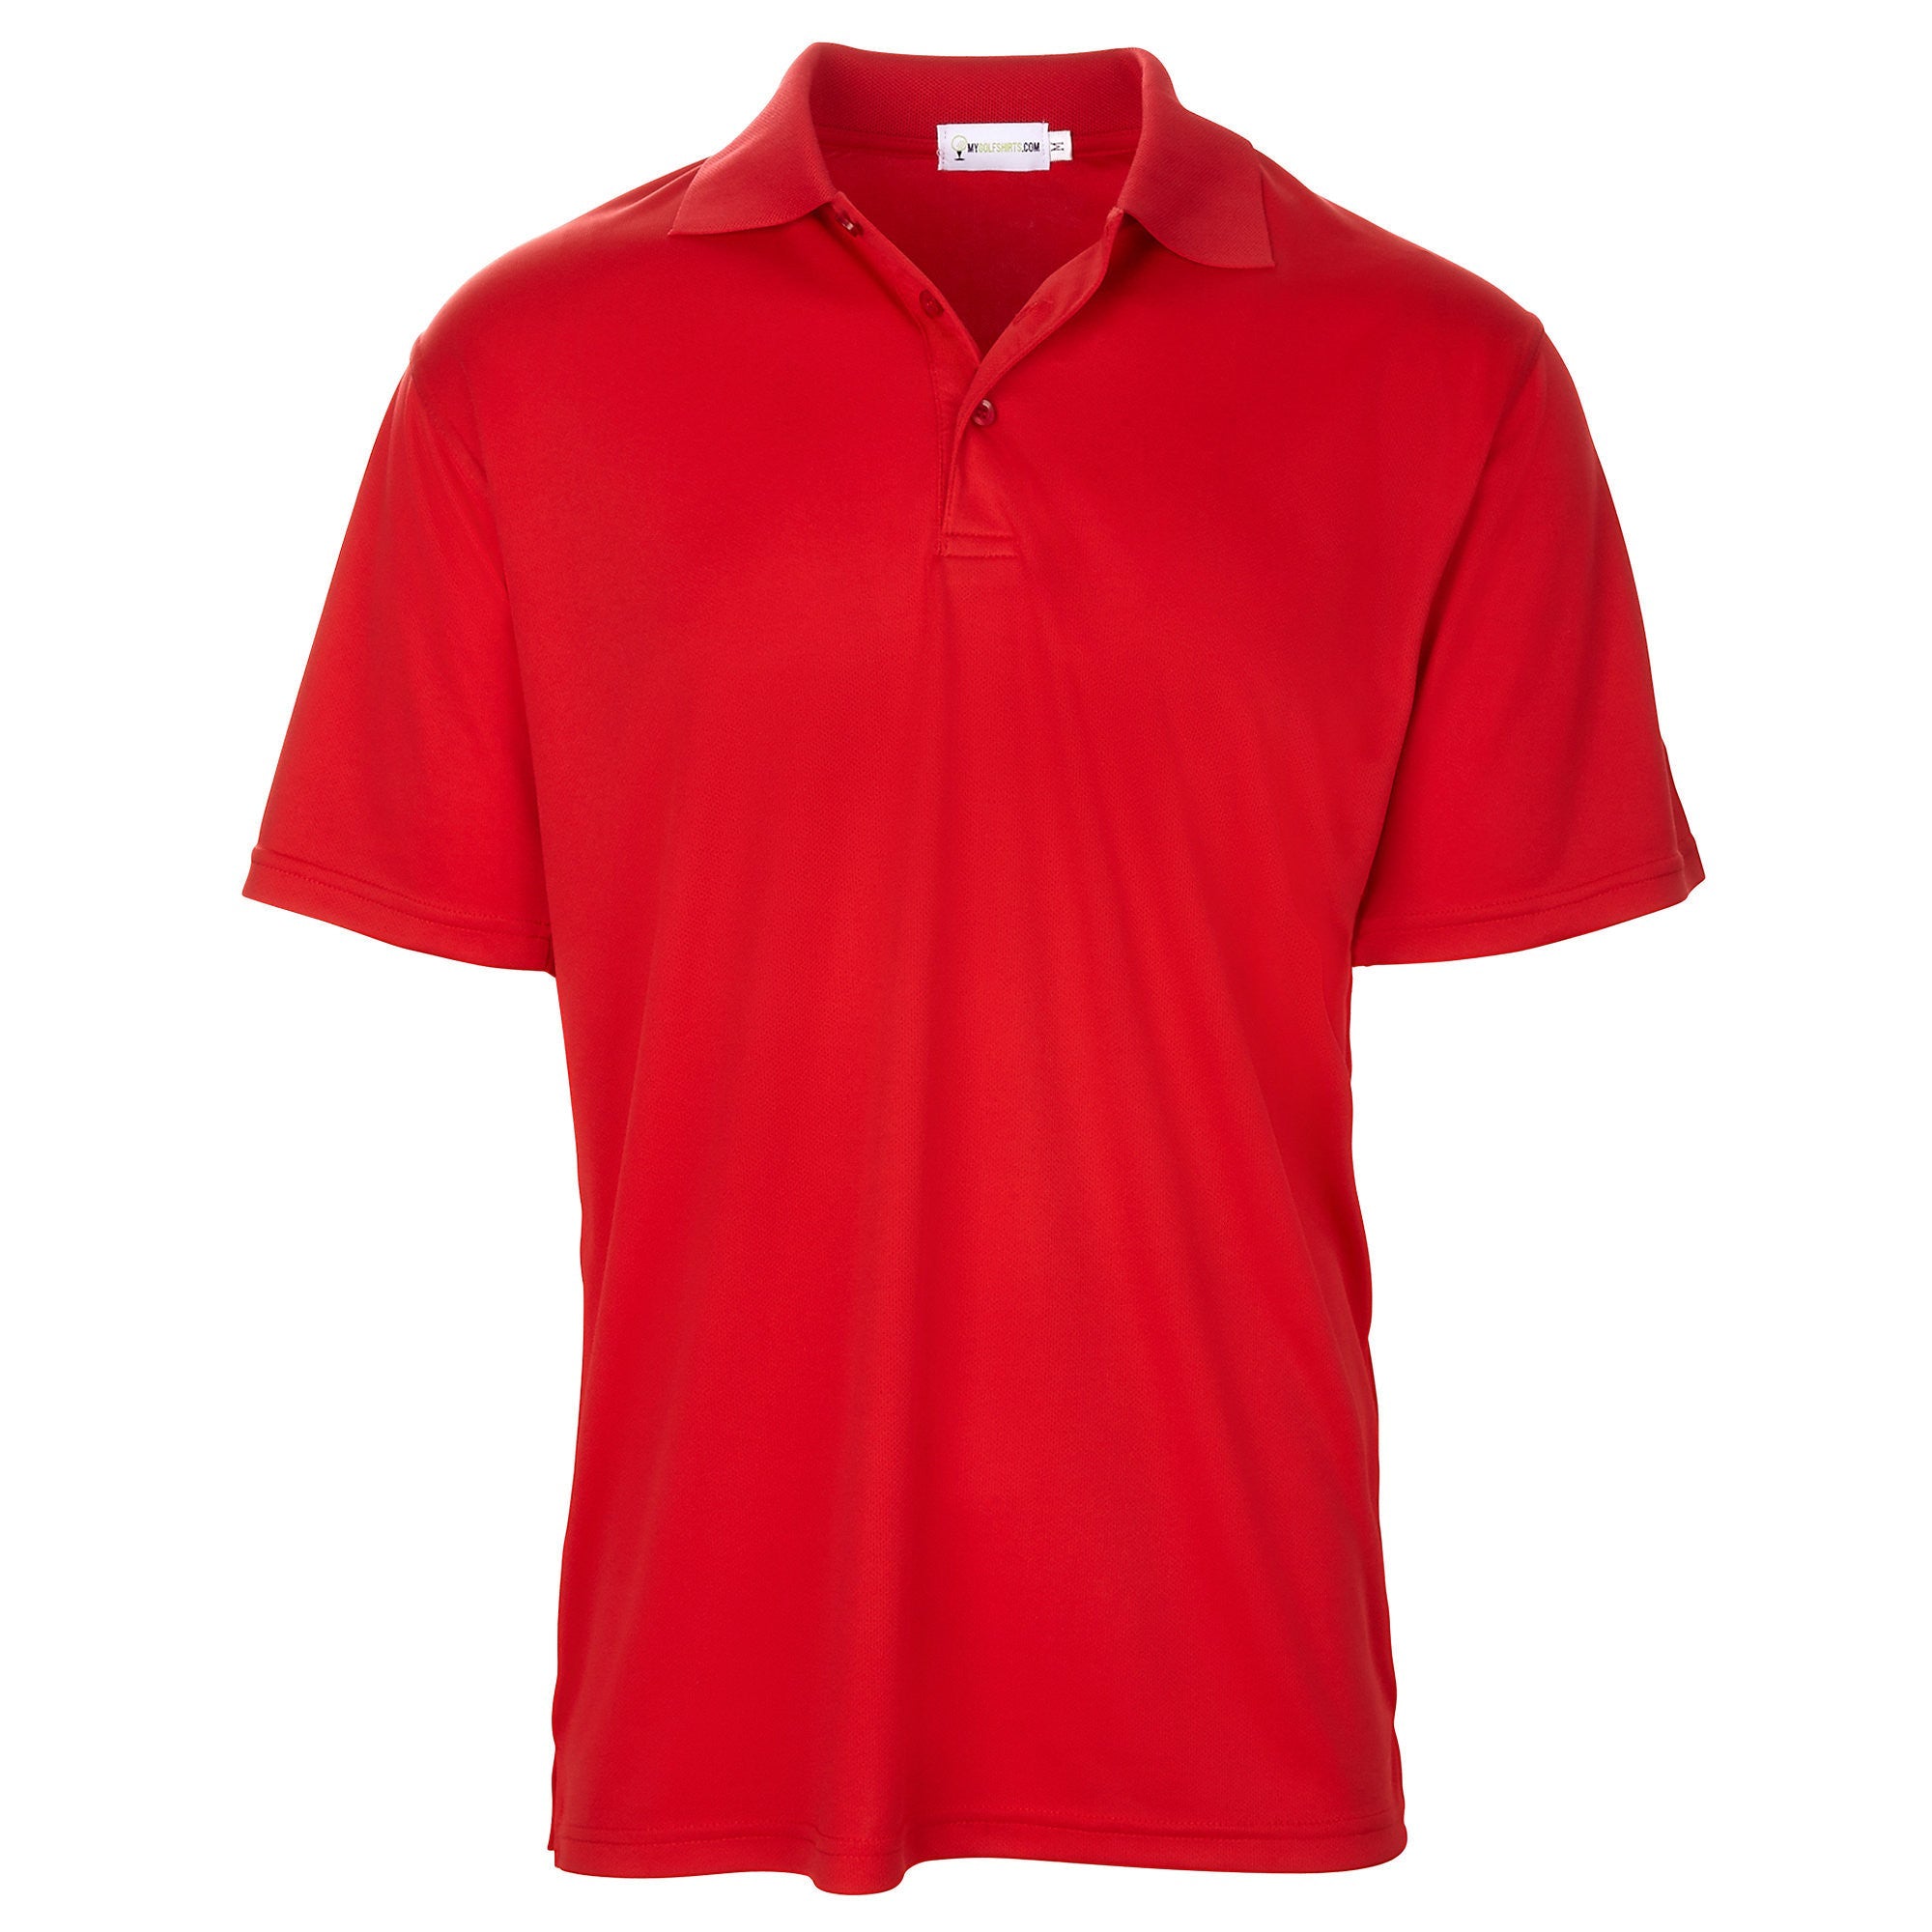 Red Color tshirt - Golf apparel packages - mygolfshirts.com